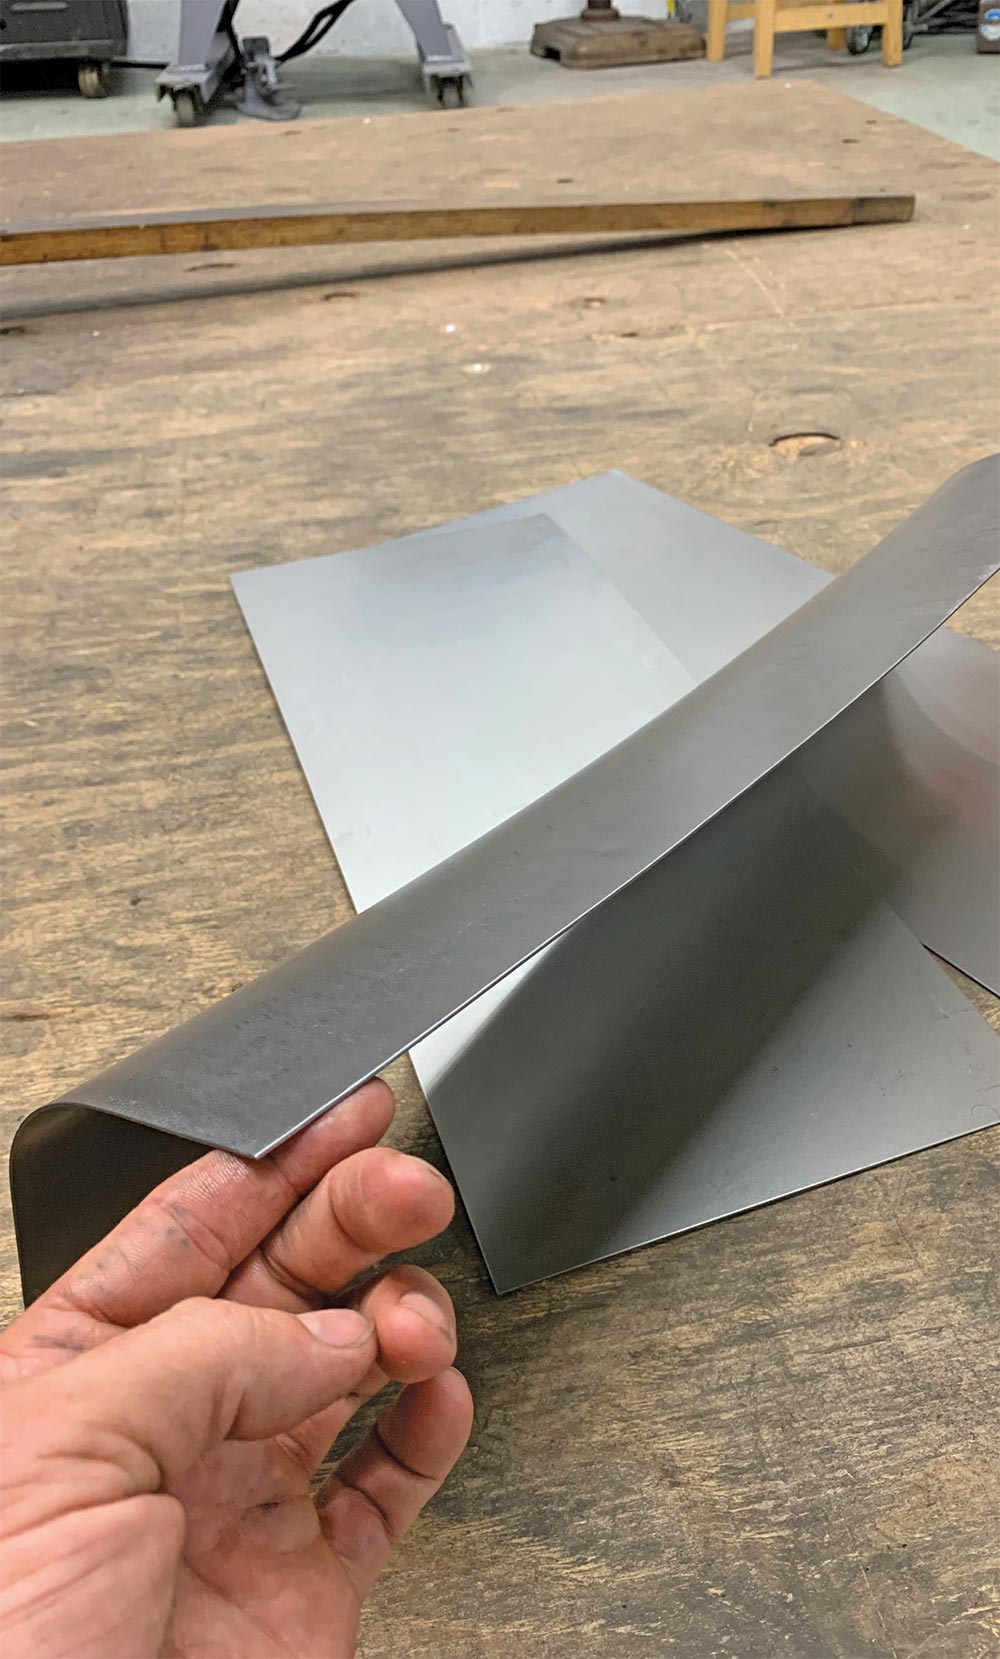 Side profile of the stretched sheet metal